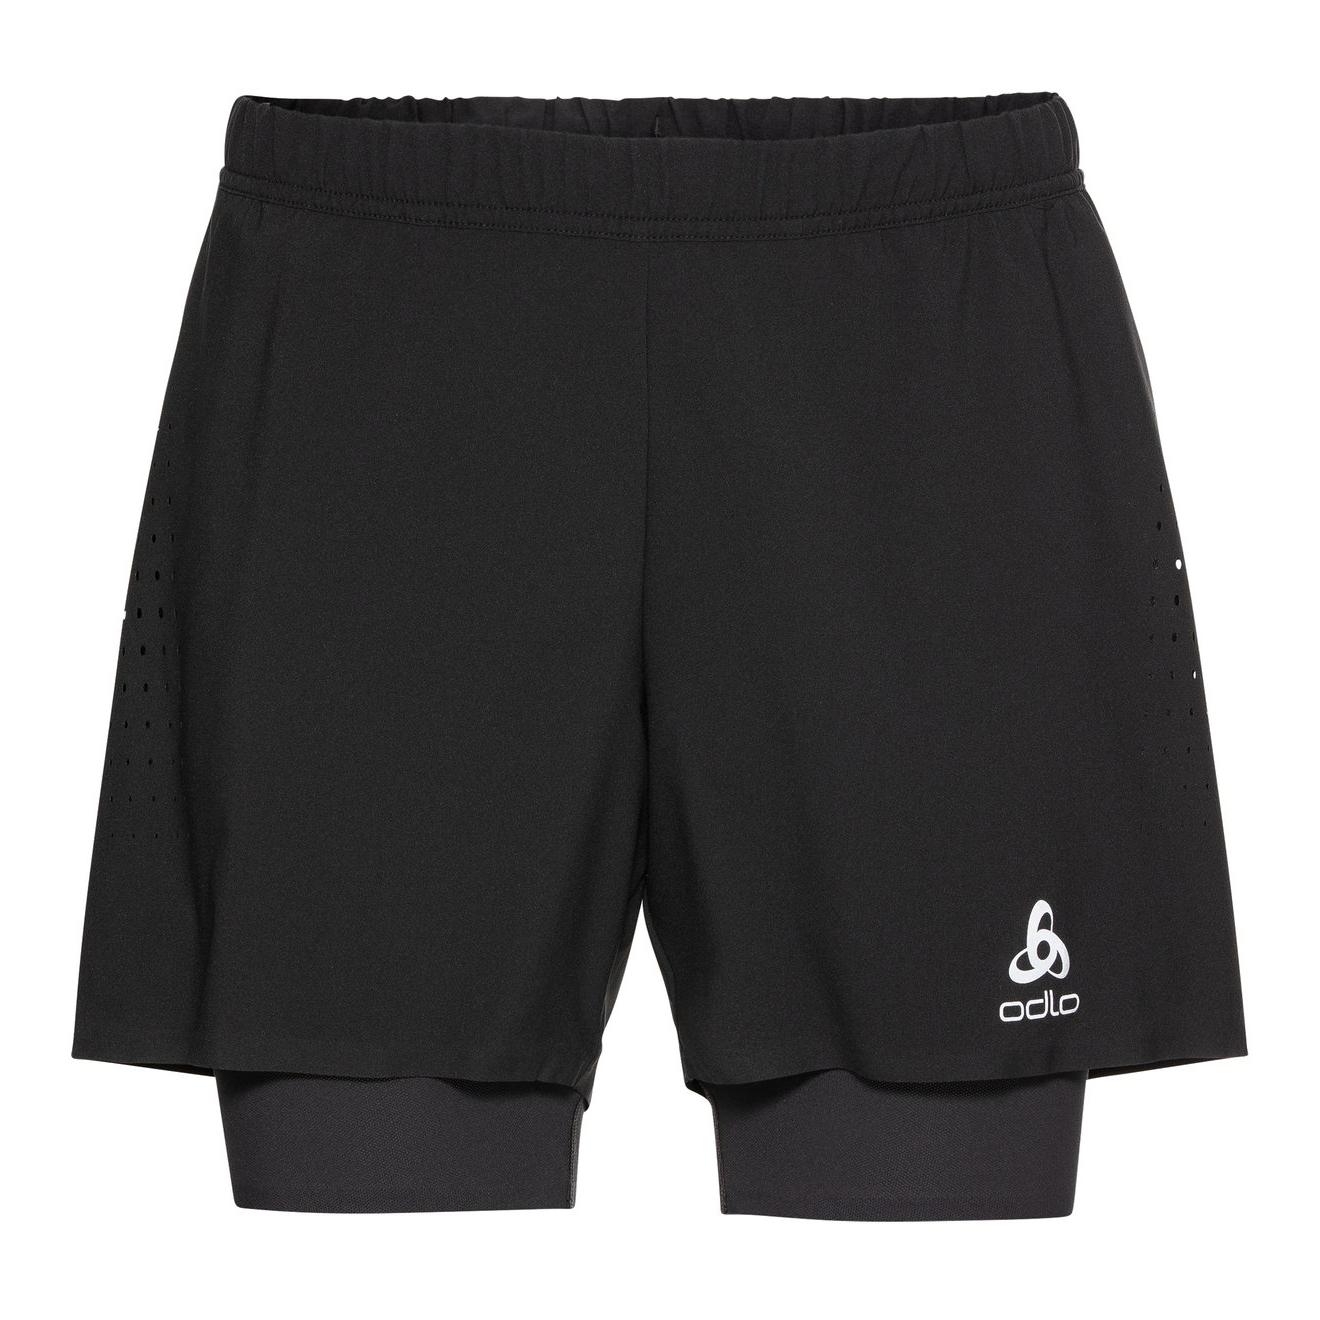 Odlo Zeroweight 5 Inches 2In1 Shorts Noir S 